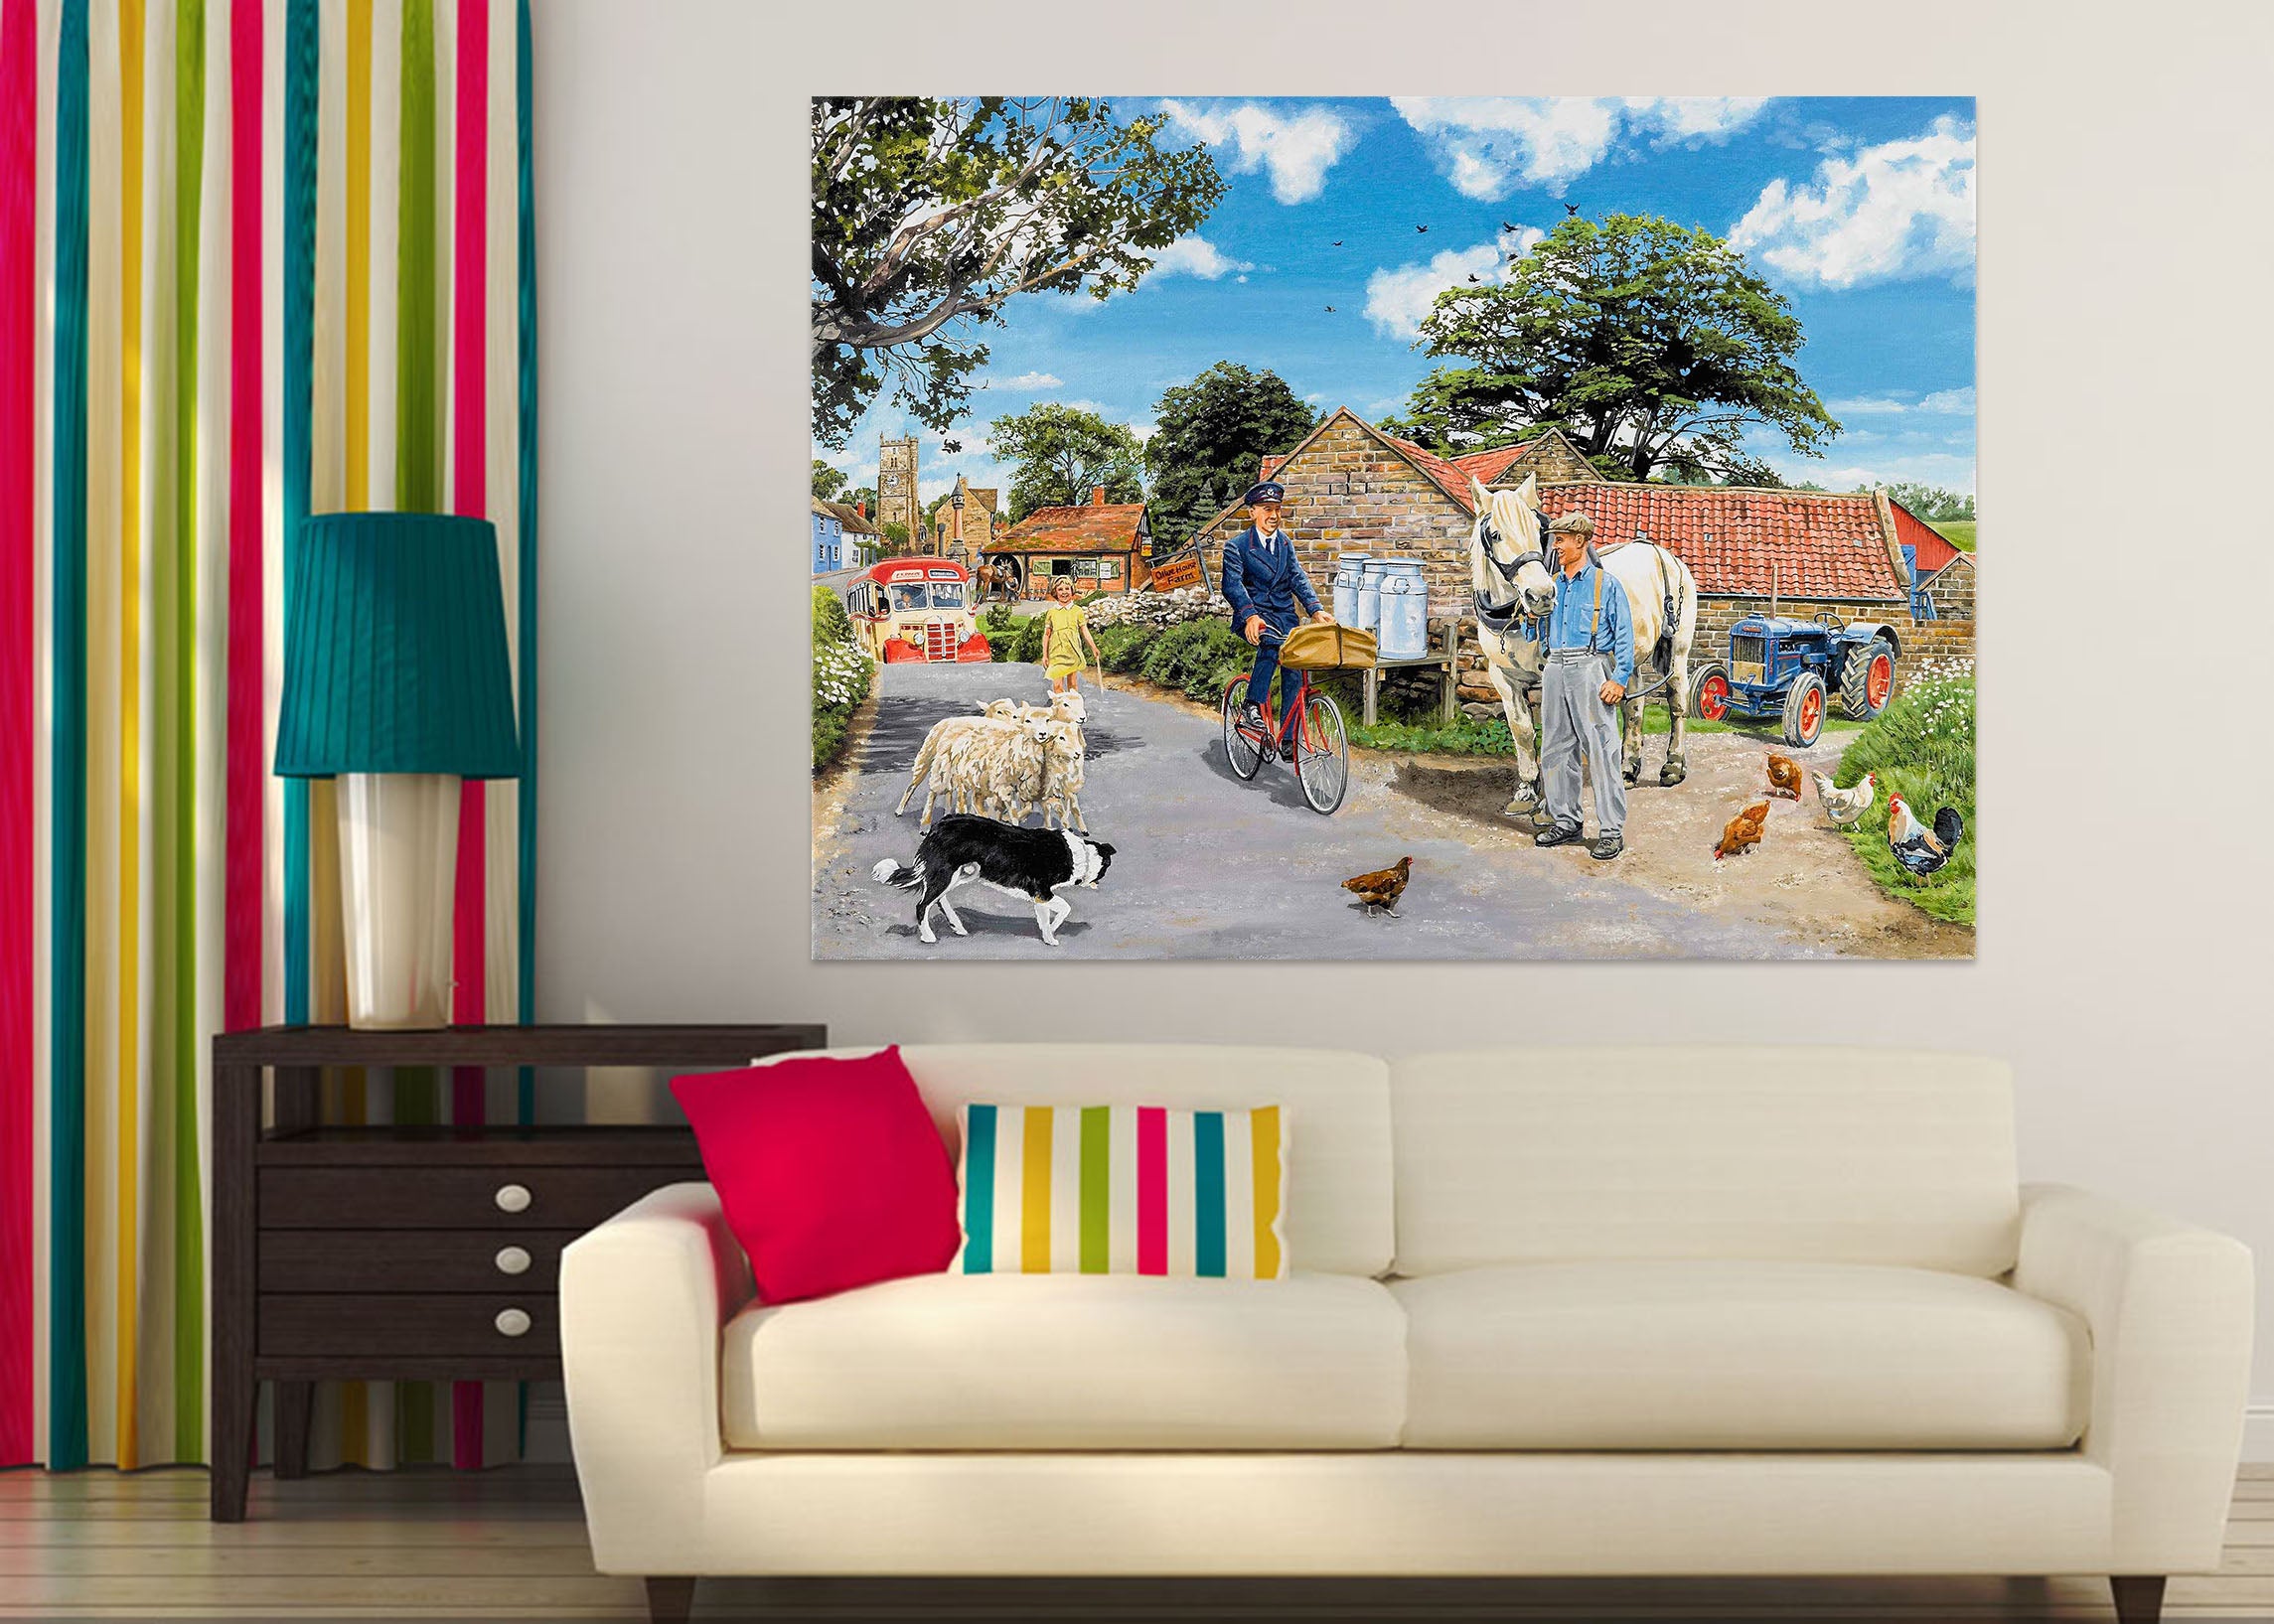 3D Post For The Farm 057 Trevor Mitchell Wall Sticker